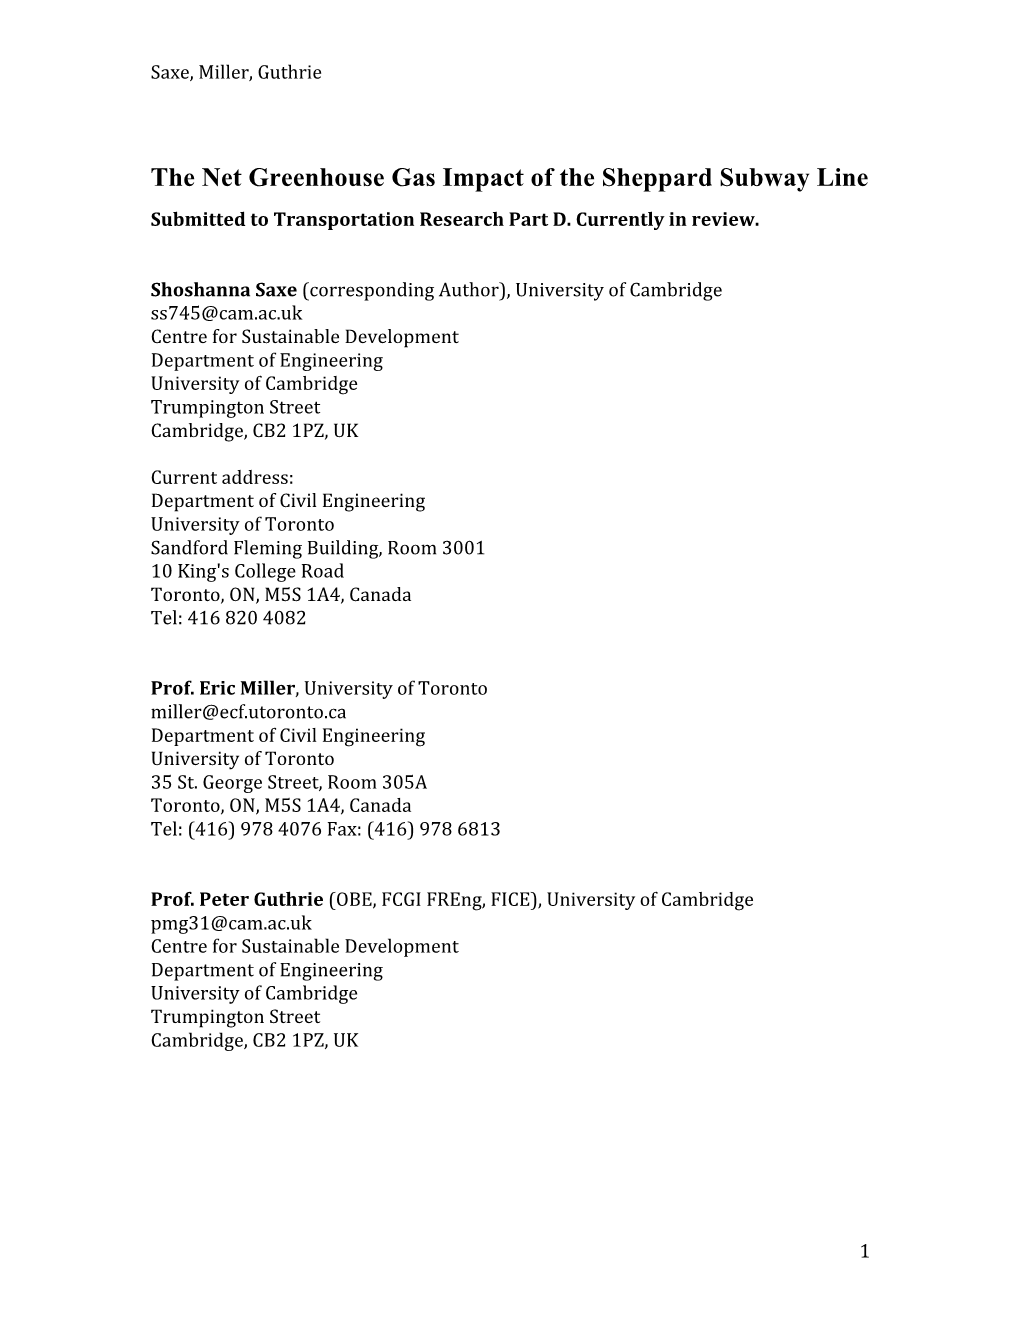 The Net Greenhouse Gas Impact of the Sheppard Subway Line Submitted to Transportation Research Part D